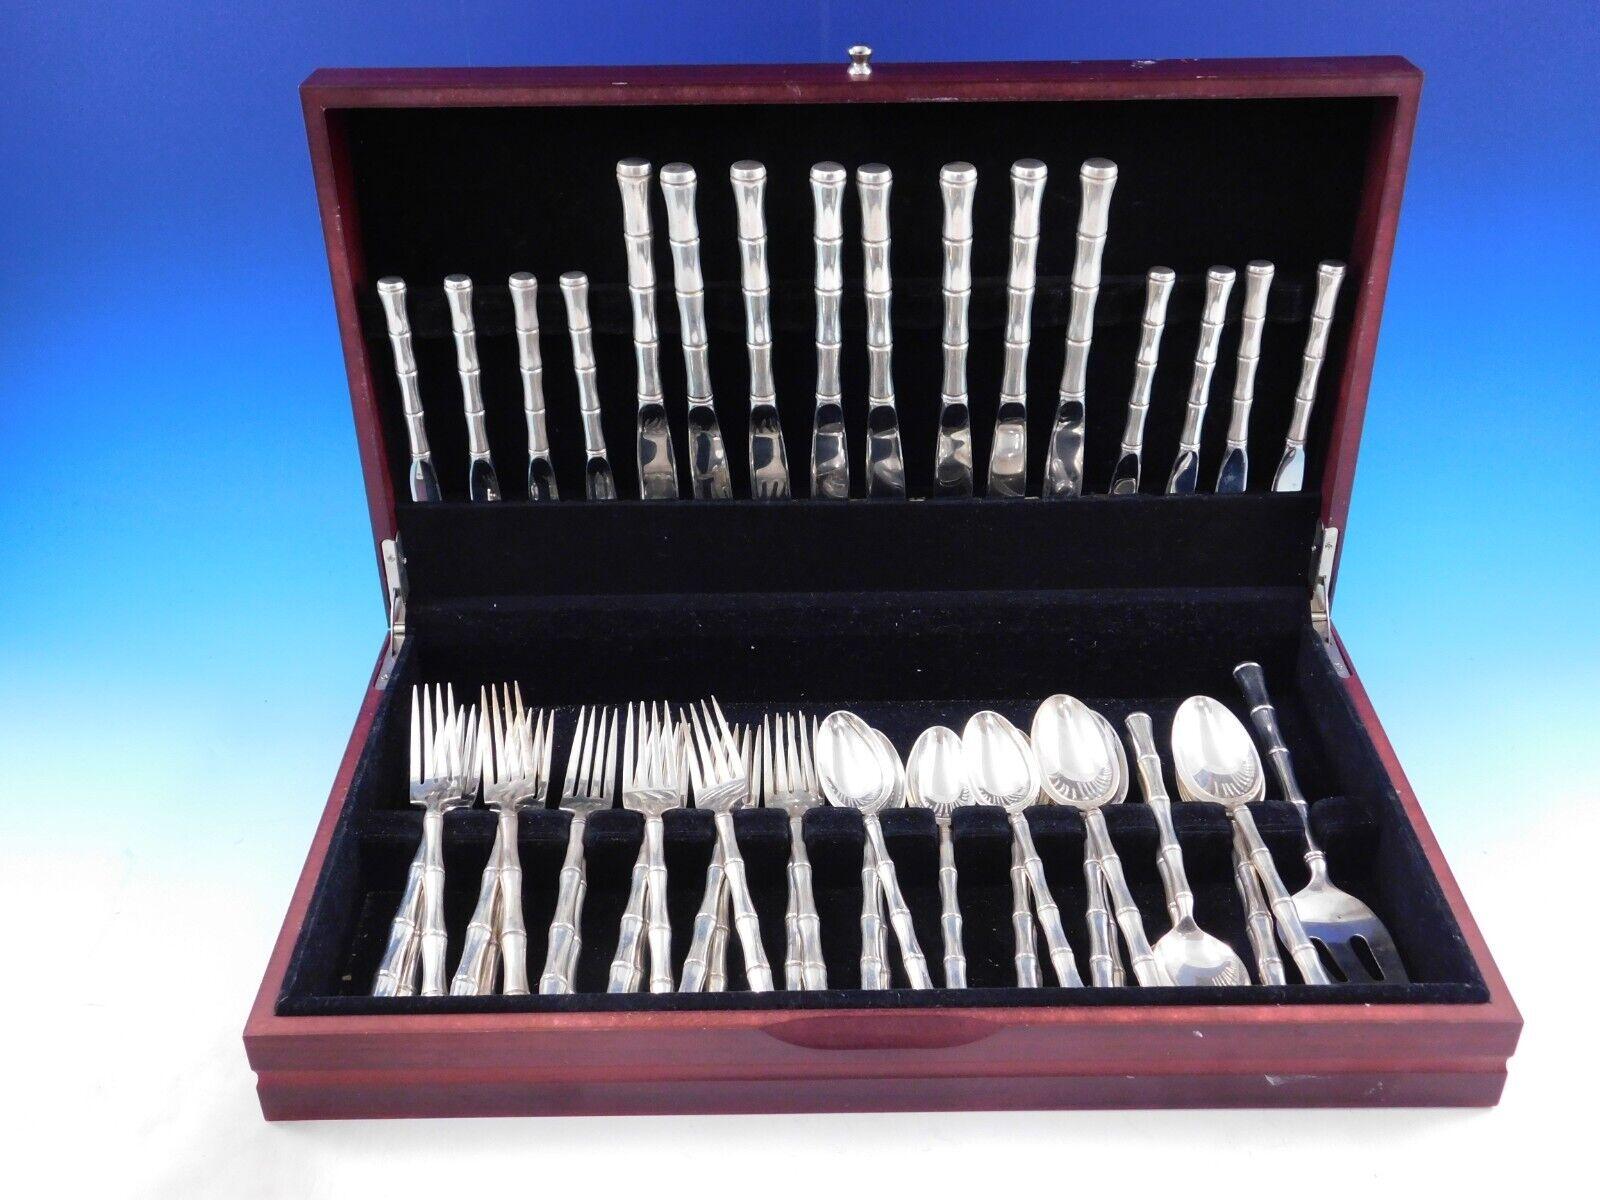 Mandarin by Towle sterling silver flatware set - 49 Pieces. This set features a hollow, shaped, bamboo-style handle. This set includes:

8 Knives, 9 1/8